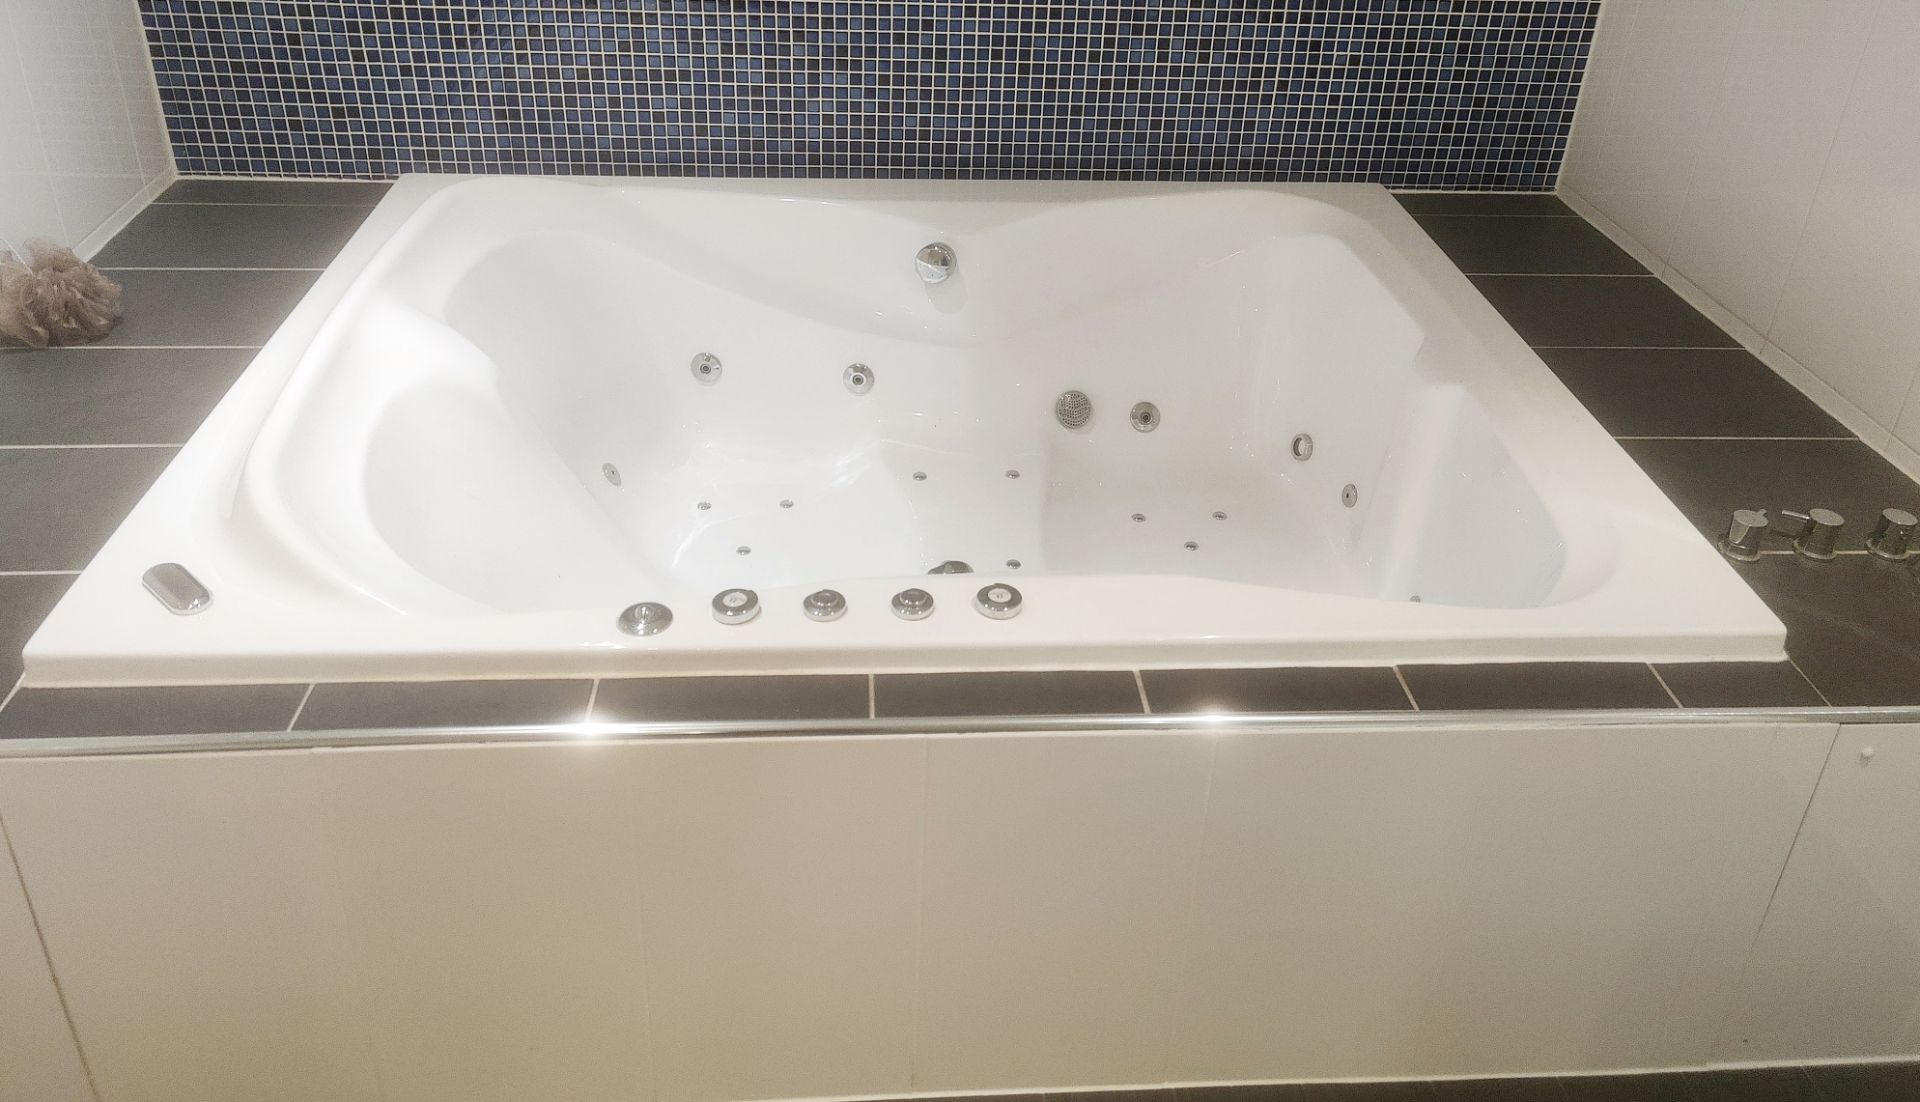 1 x Bronte Jacuzzi Whirlpool Bath - Approx 6.5ft x 5ft Size - Includes Brassware, Water Jets & Pump - Image 4 of 15